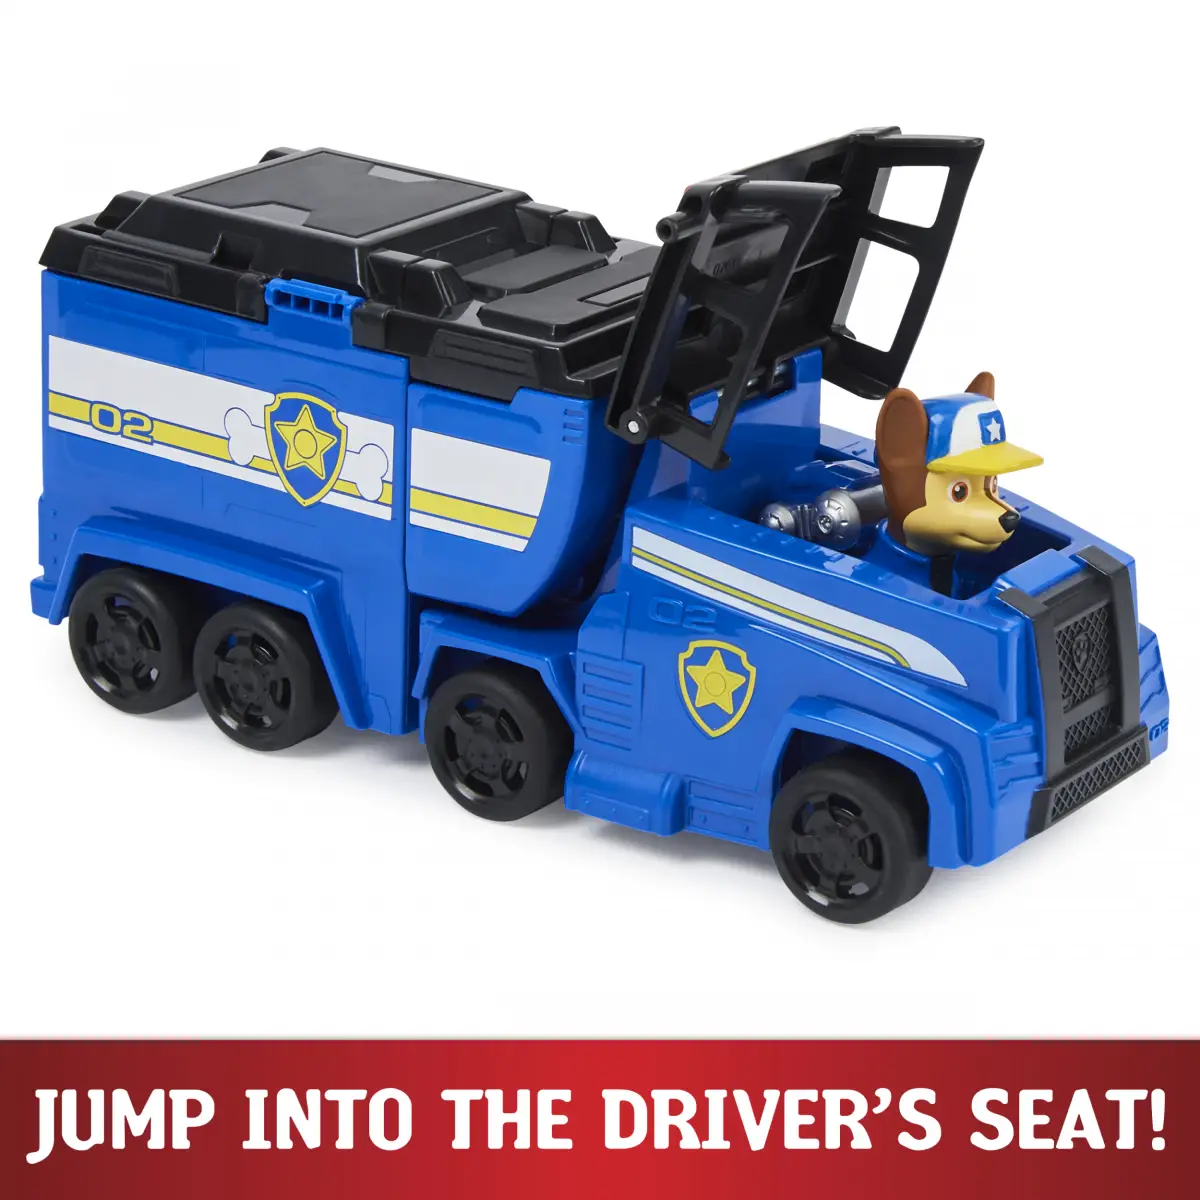 Paw Patrol, Big Truck Pup’S Chase Transforming Toy Trucks With Collectible Action Figure, Kids Toys For Ages 3 And Up